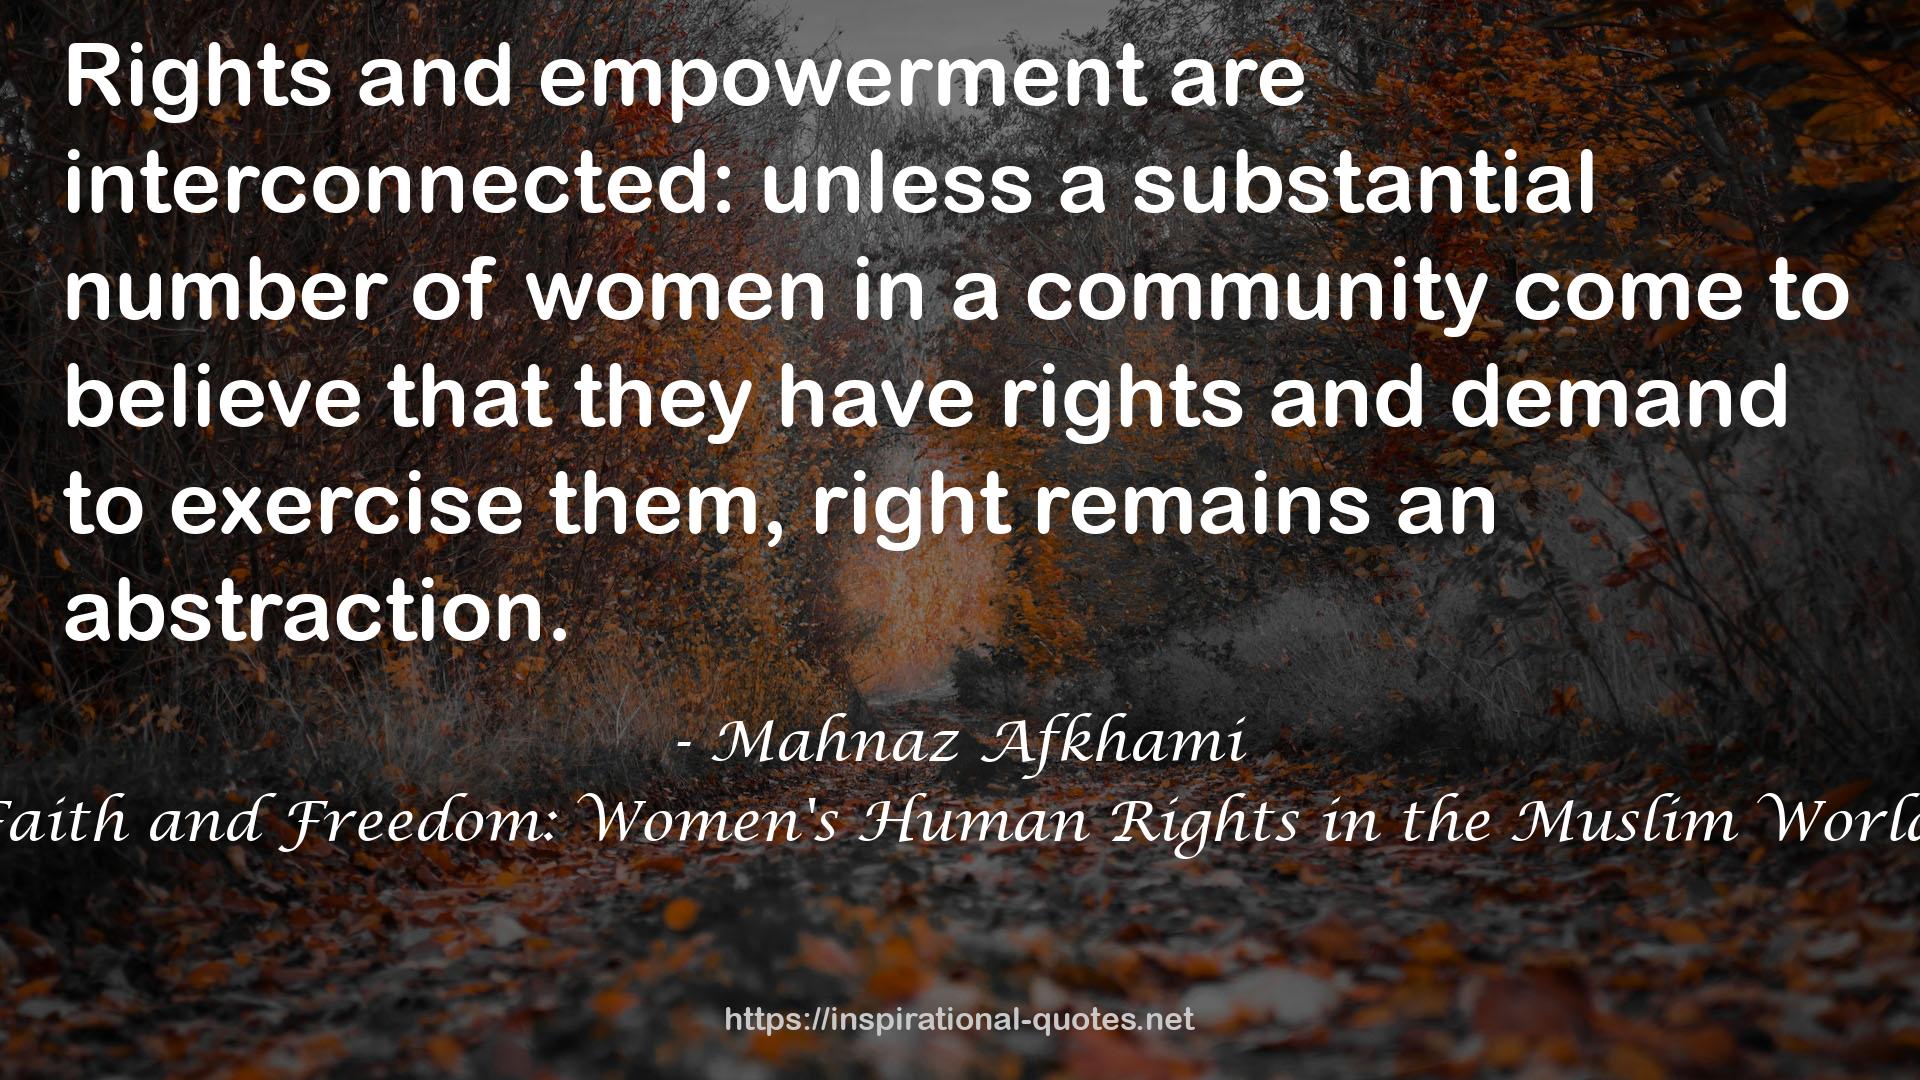 Faith and Freedom: Women's Human Rights in the Muslim World QUOTES